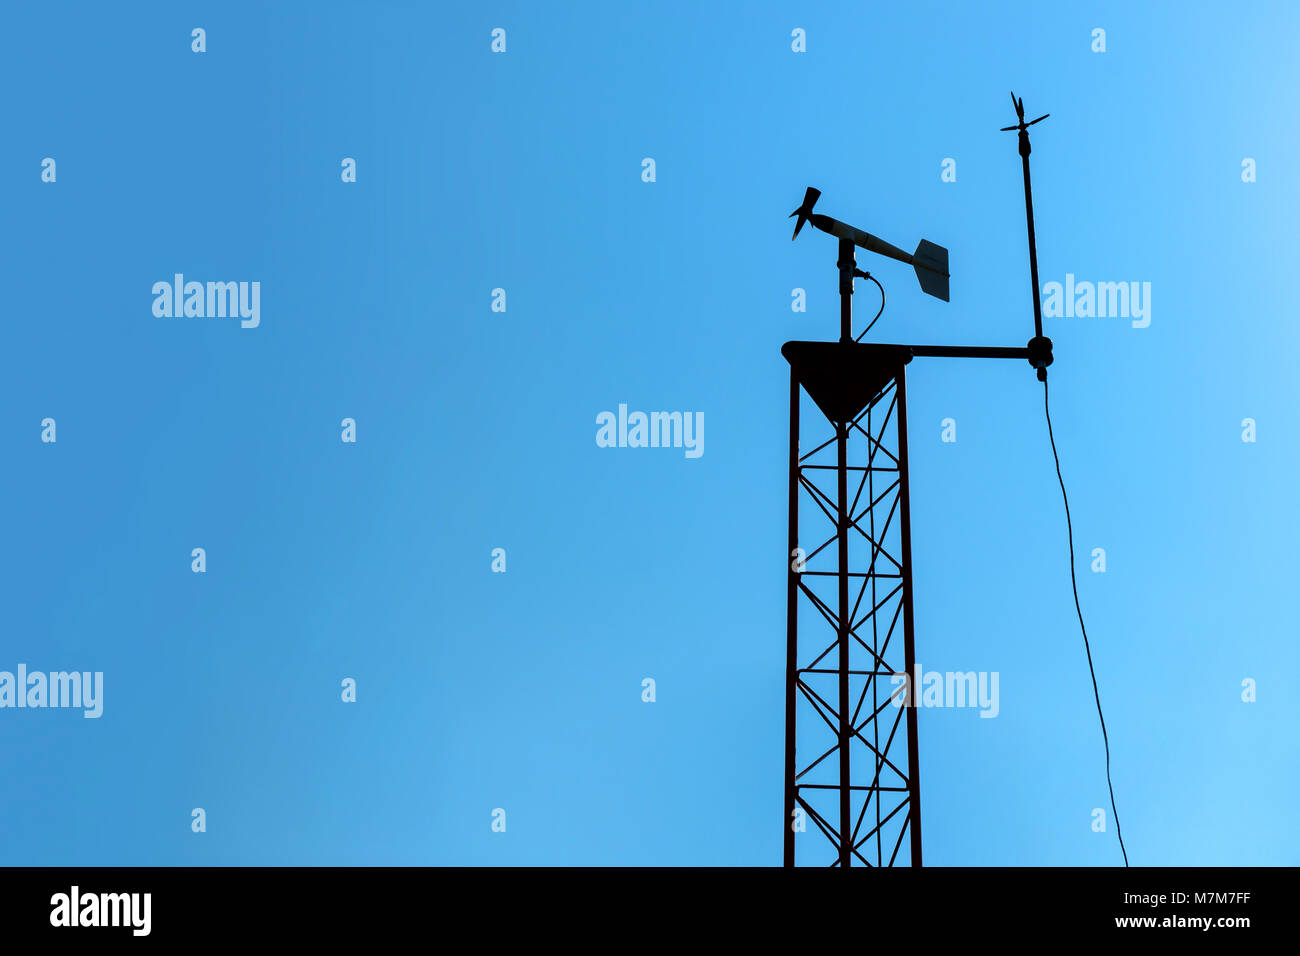 Smart agriculture and smart farm technology concept. Revolving vane anemometer, a meteorological instrument used to measure the wind speed and solar c Stock Photo